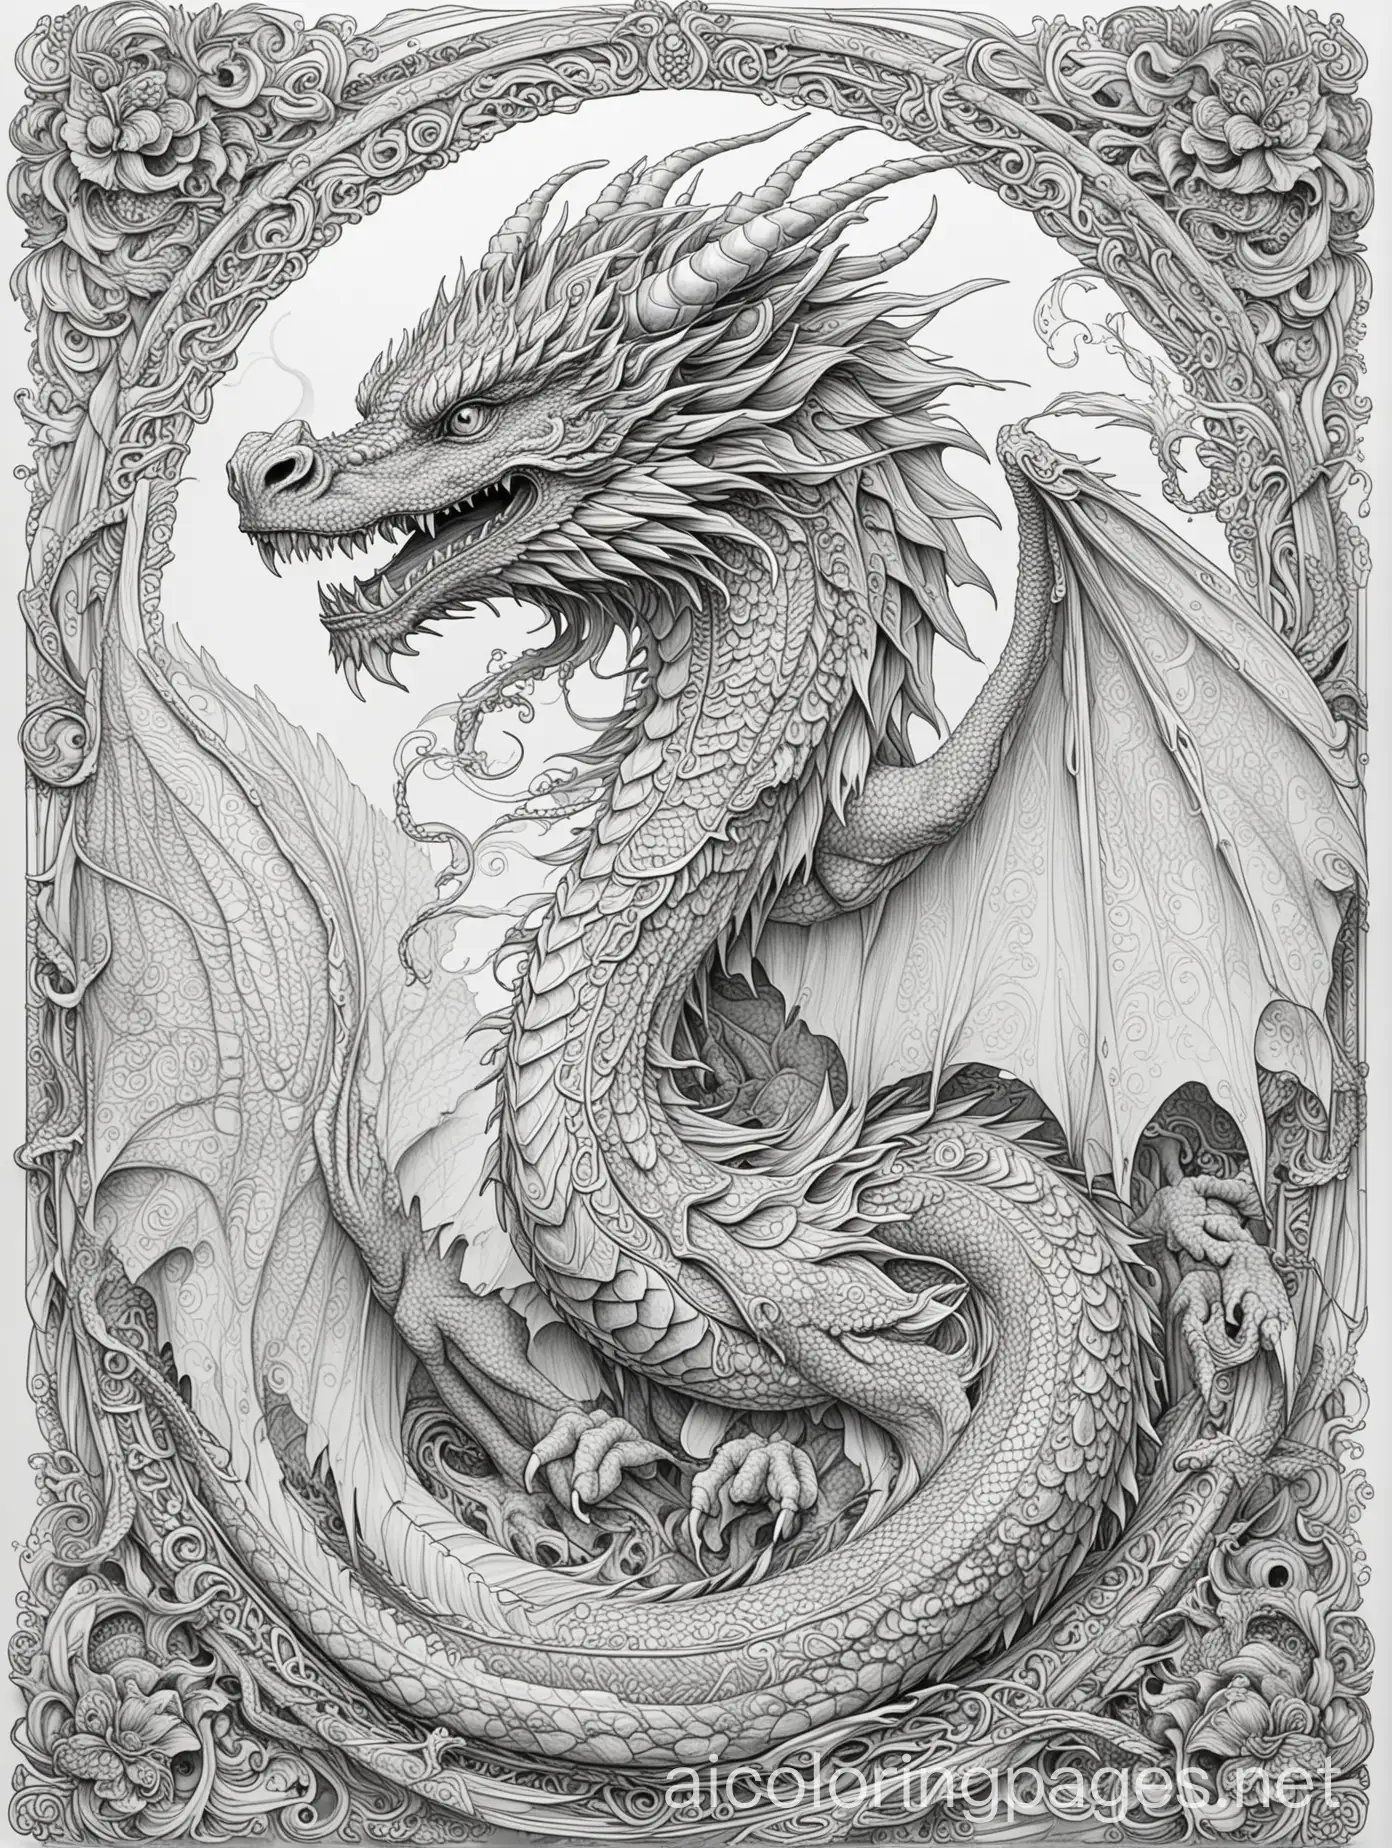 elaborate and intricate detailed regal full dragon for adult coloring book , Coloring Page, black and white, line art, white background, Simplicity, Ample White Space. The background of the coloring page is plain white to make it easy for young children to color within the lines. The outlines of all the subjects are easy to distinguish, making it simple for kids to color without too much difficulty